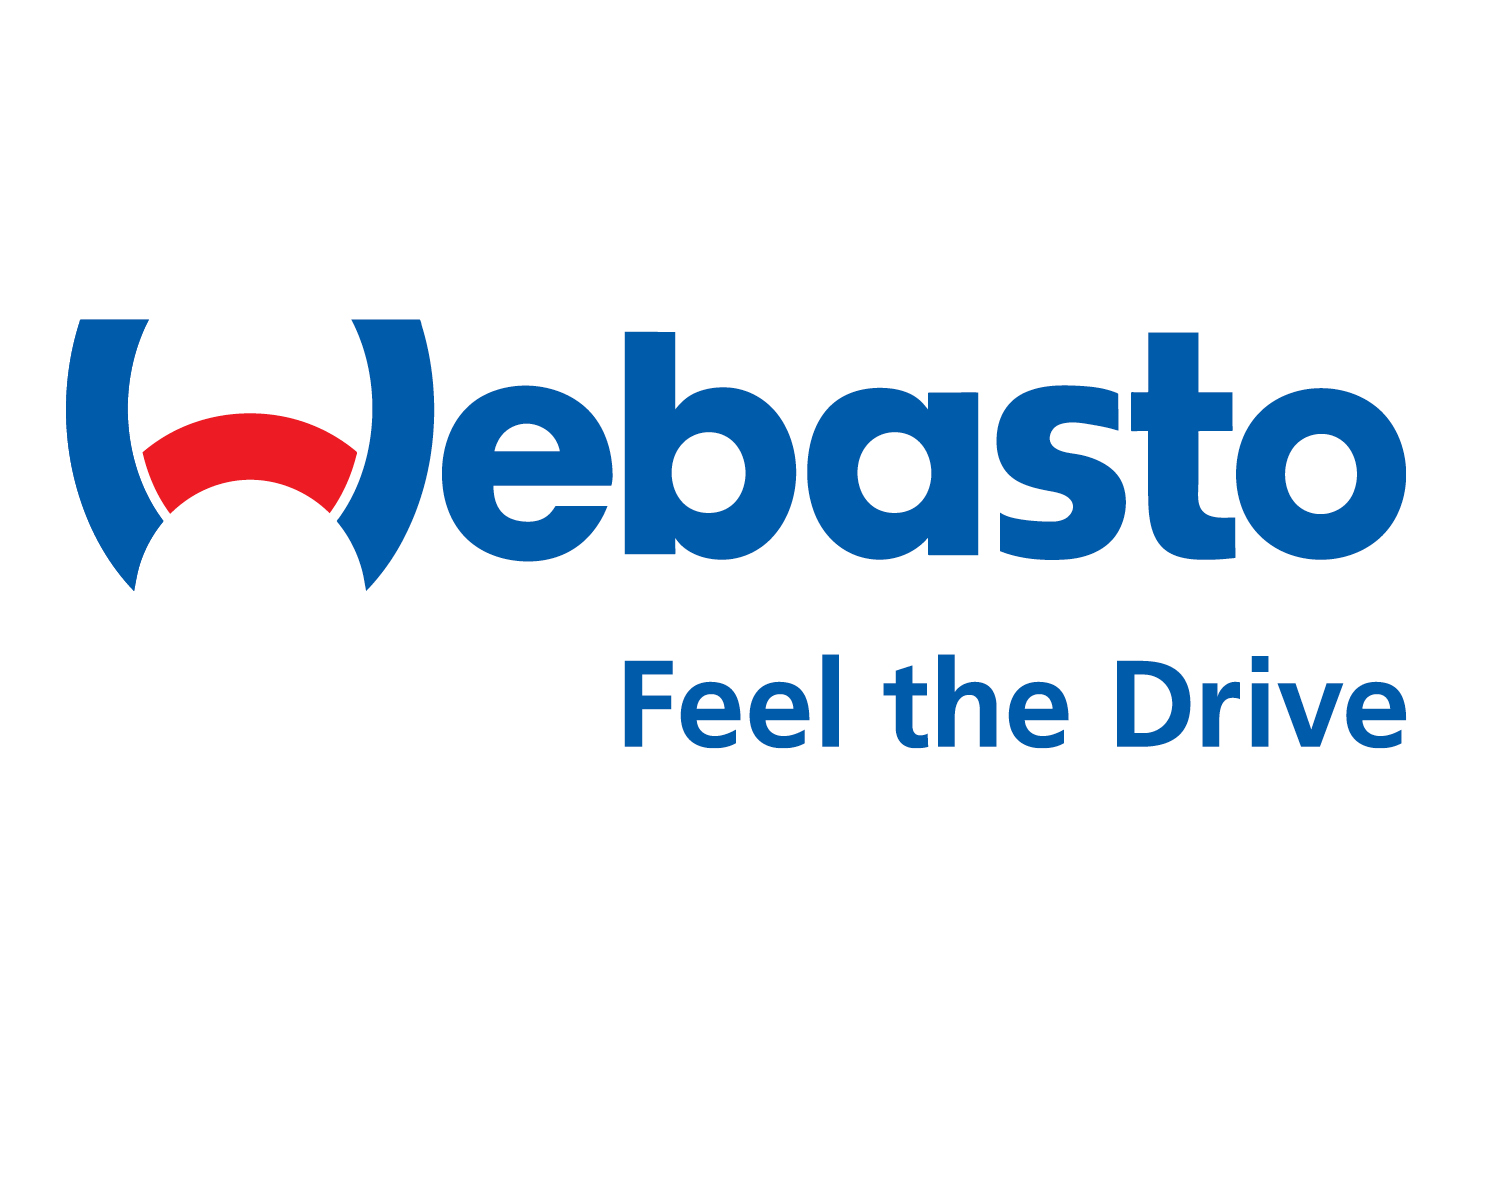 Webasto is one of the largest suppliers of heating, cooling and ventilation systems to the automotive, commercial truck and specialty vehicles markets.